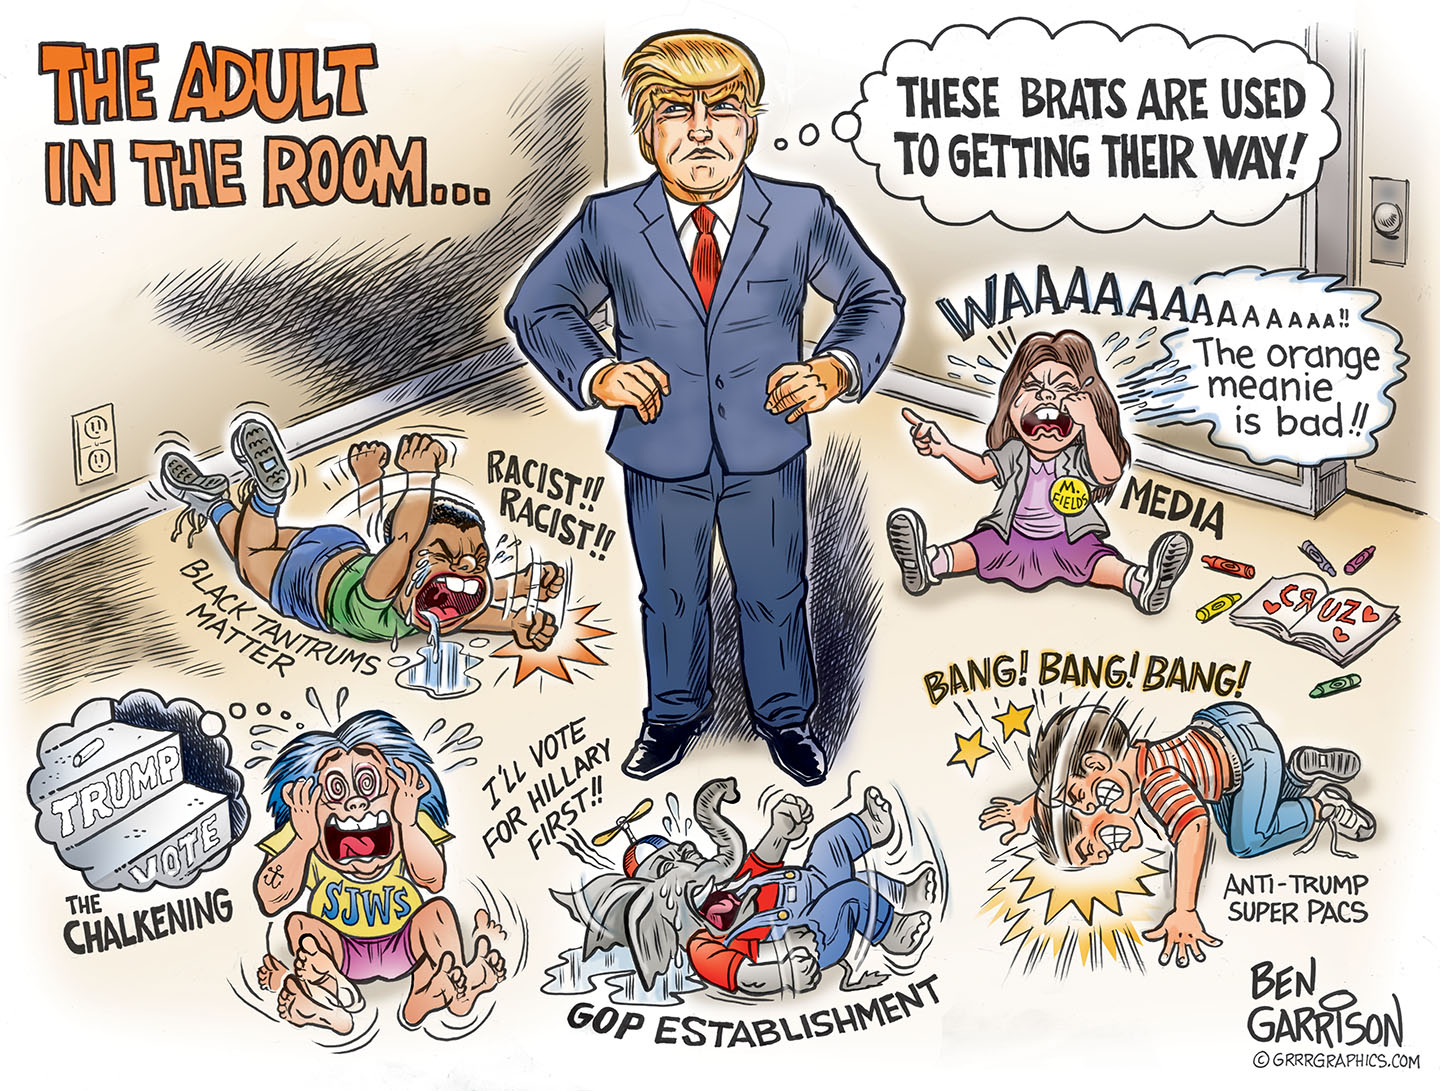 “The Adult in the Room, Donald Trump”, Ben Garrison ... - 1440 x 1091 jpeg 475kB